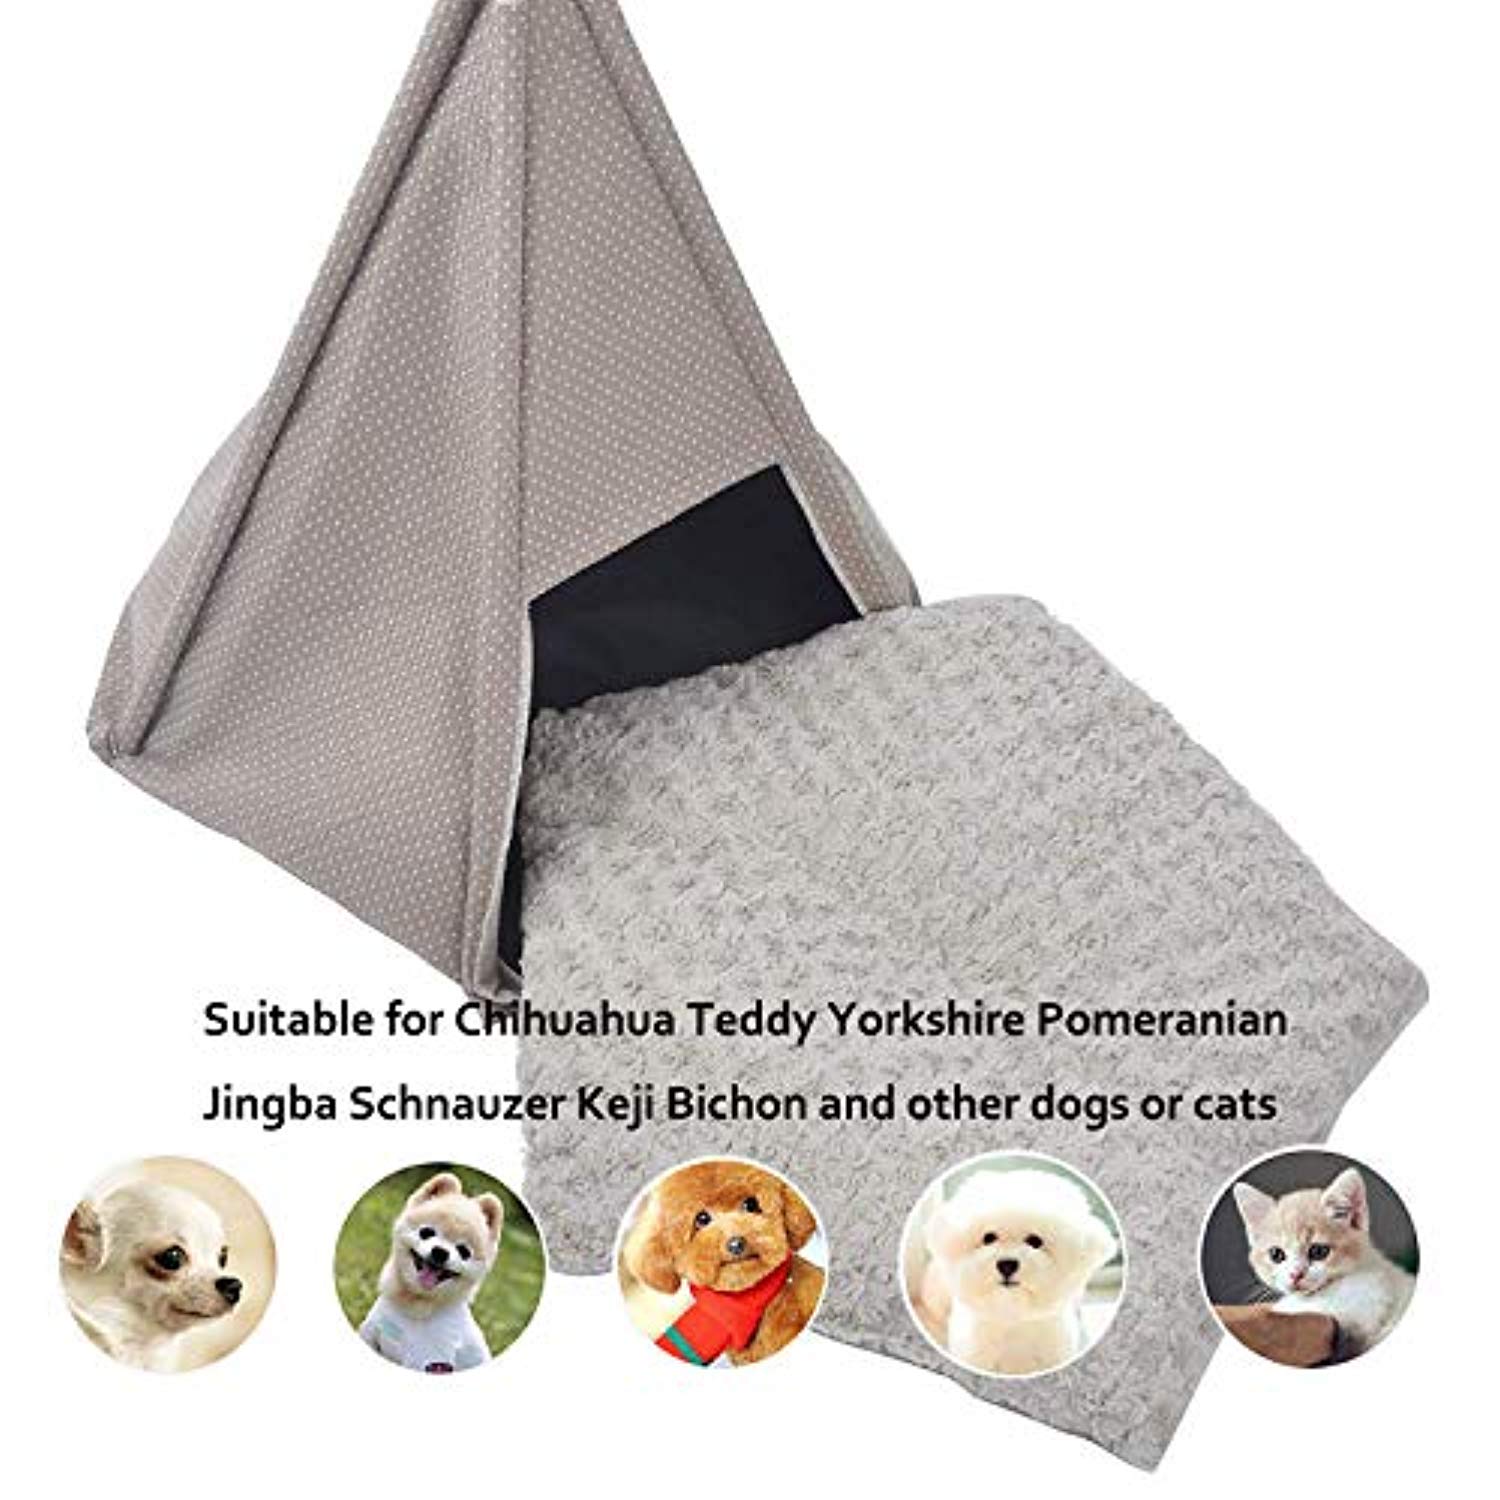 Bosonshop Portable Pet Canopy Teepee Indian Tent Bed for Little Dogs and Cats with a Soft Cushion